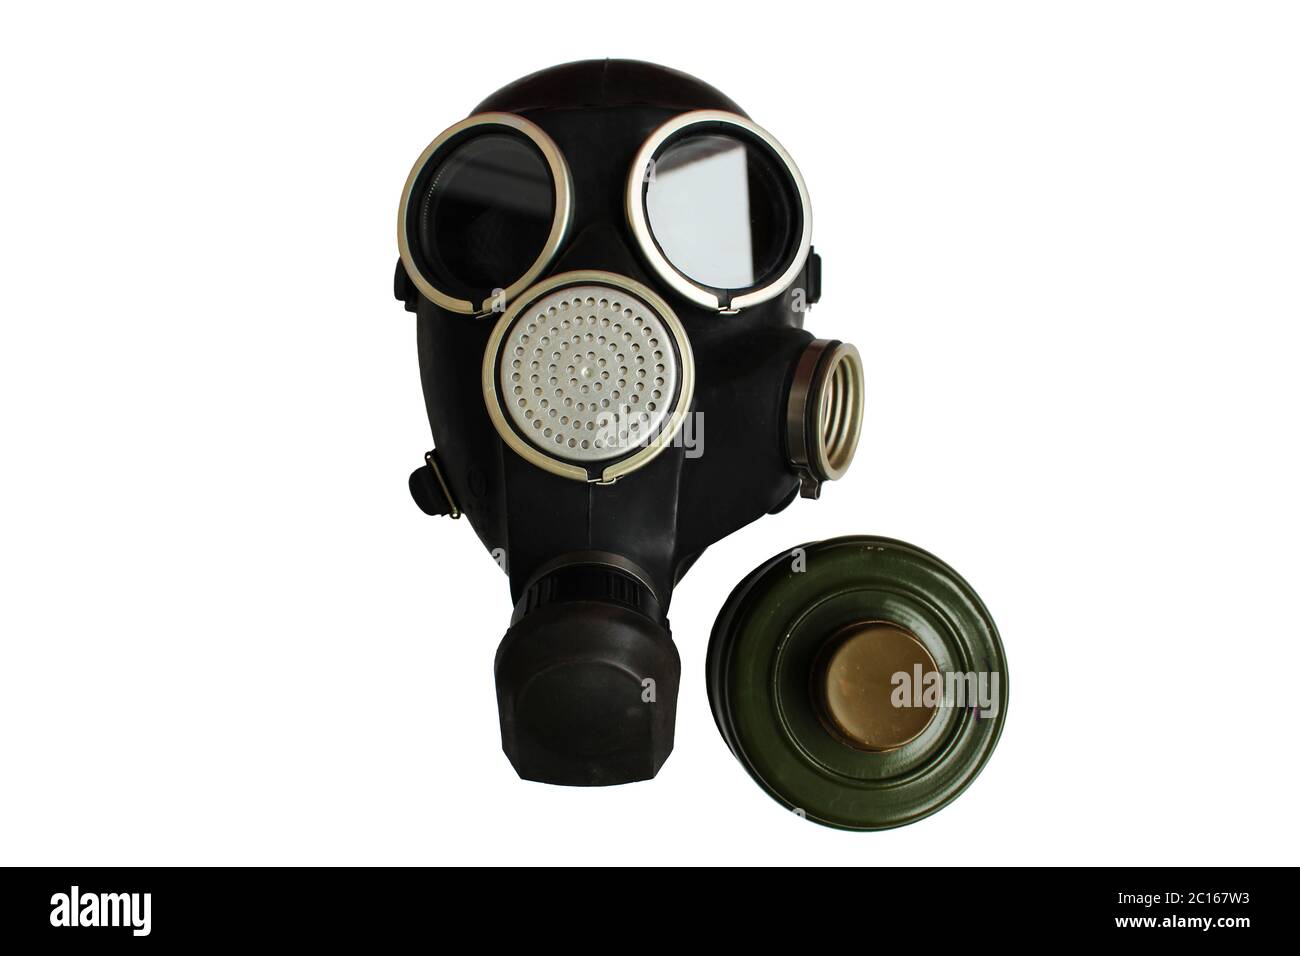 Isolated old russian gas mask on white background Stock Photo